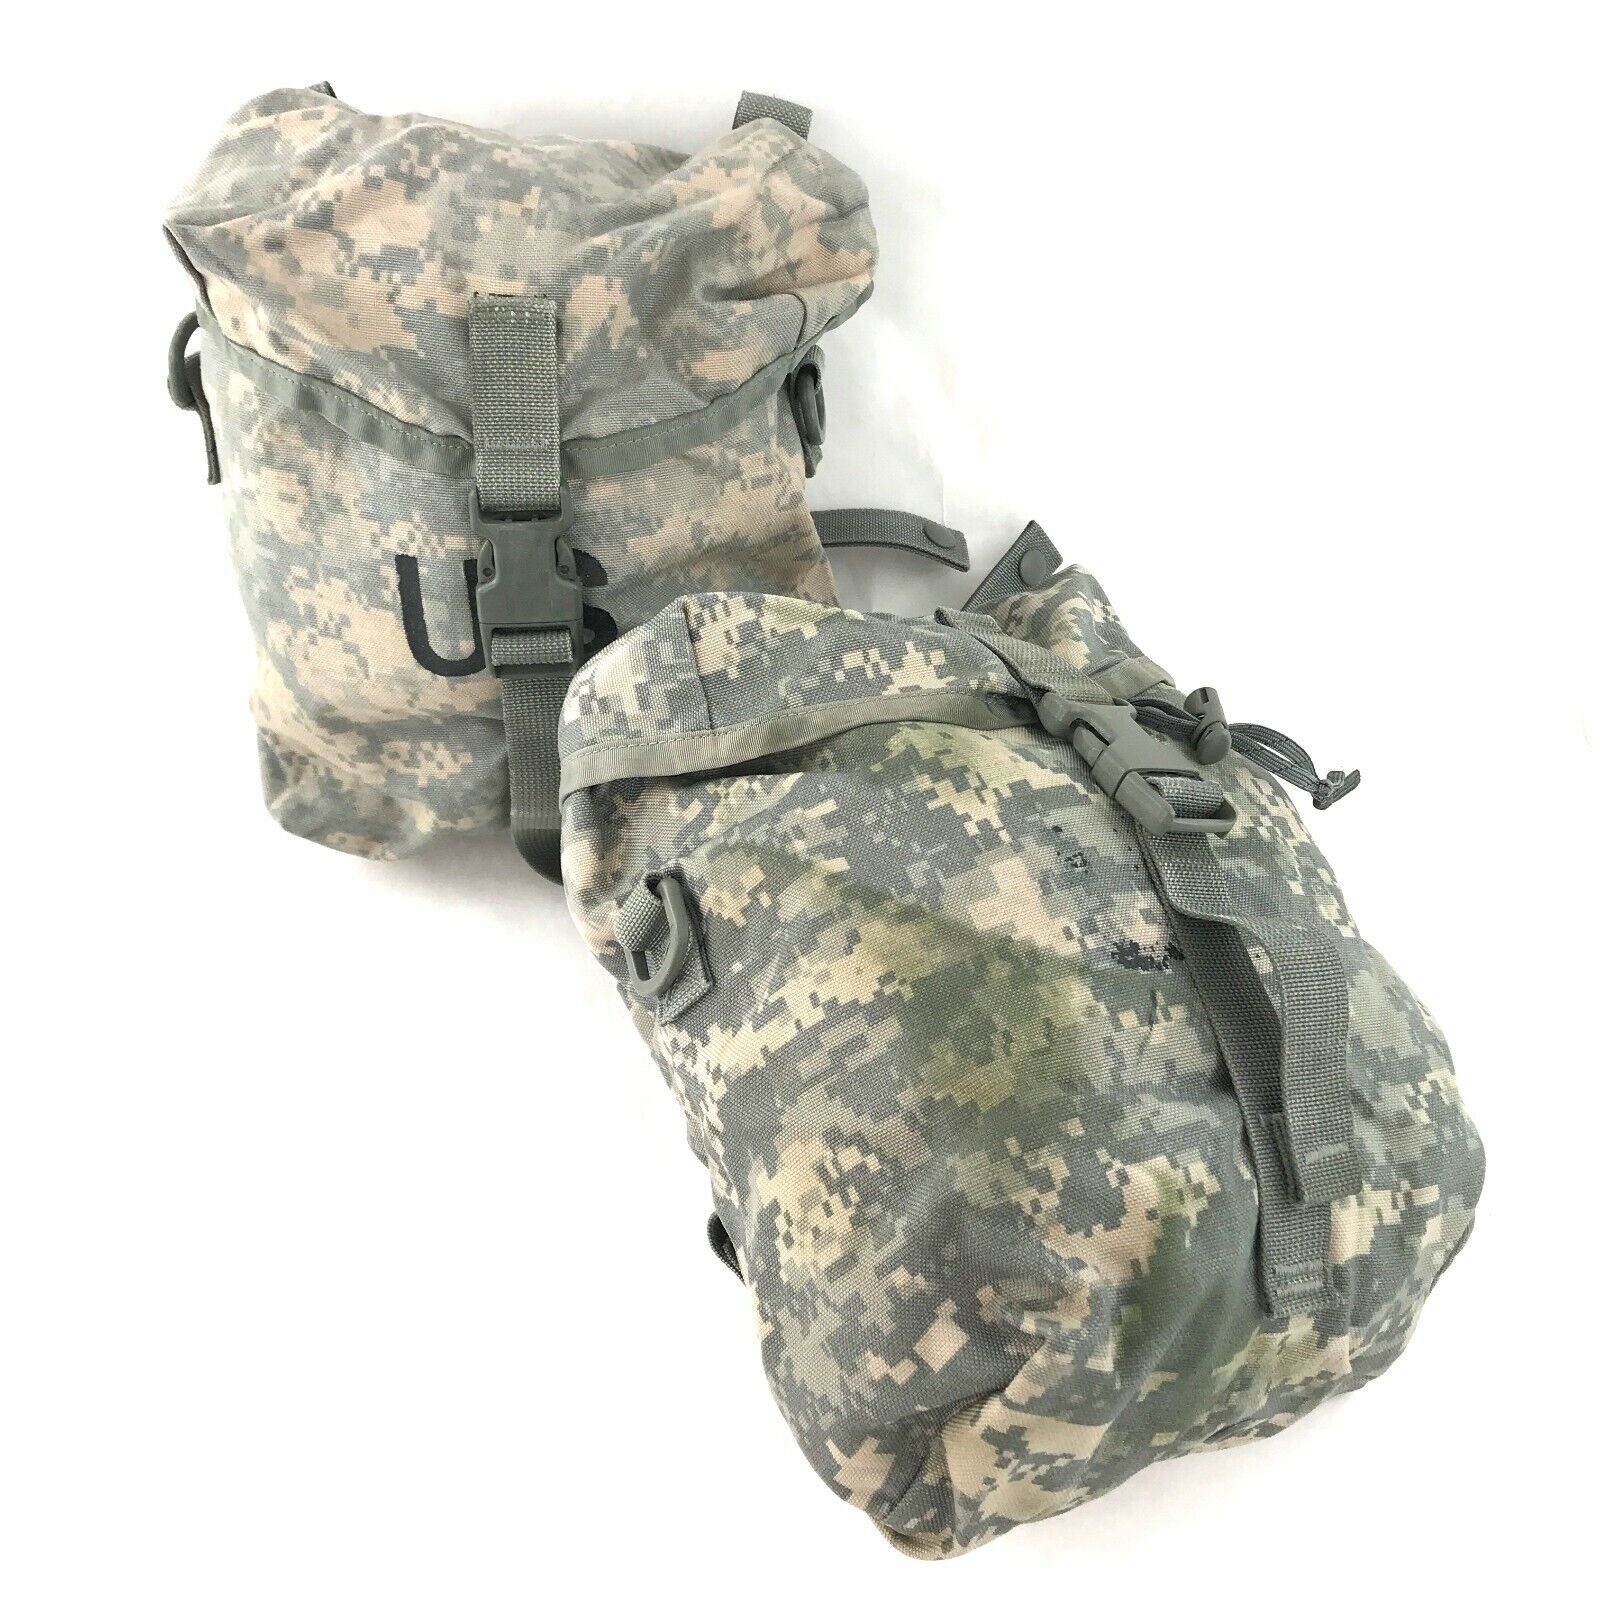 2 USGI MOLLE II Sustainment Pouches for Army ACU Military Rucksack, DEFECT USGI